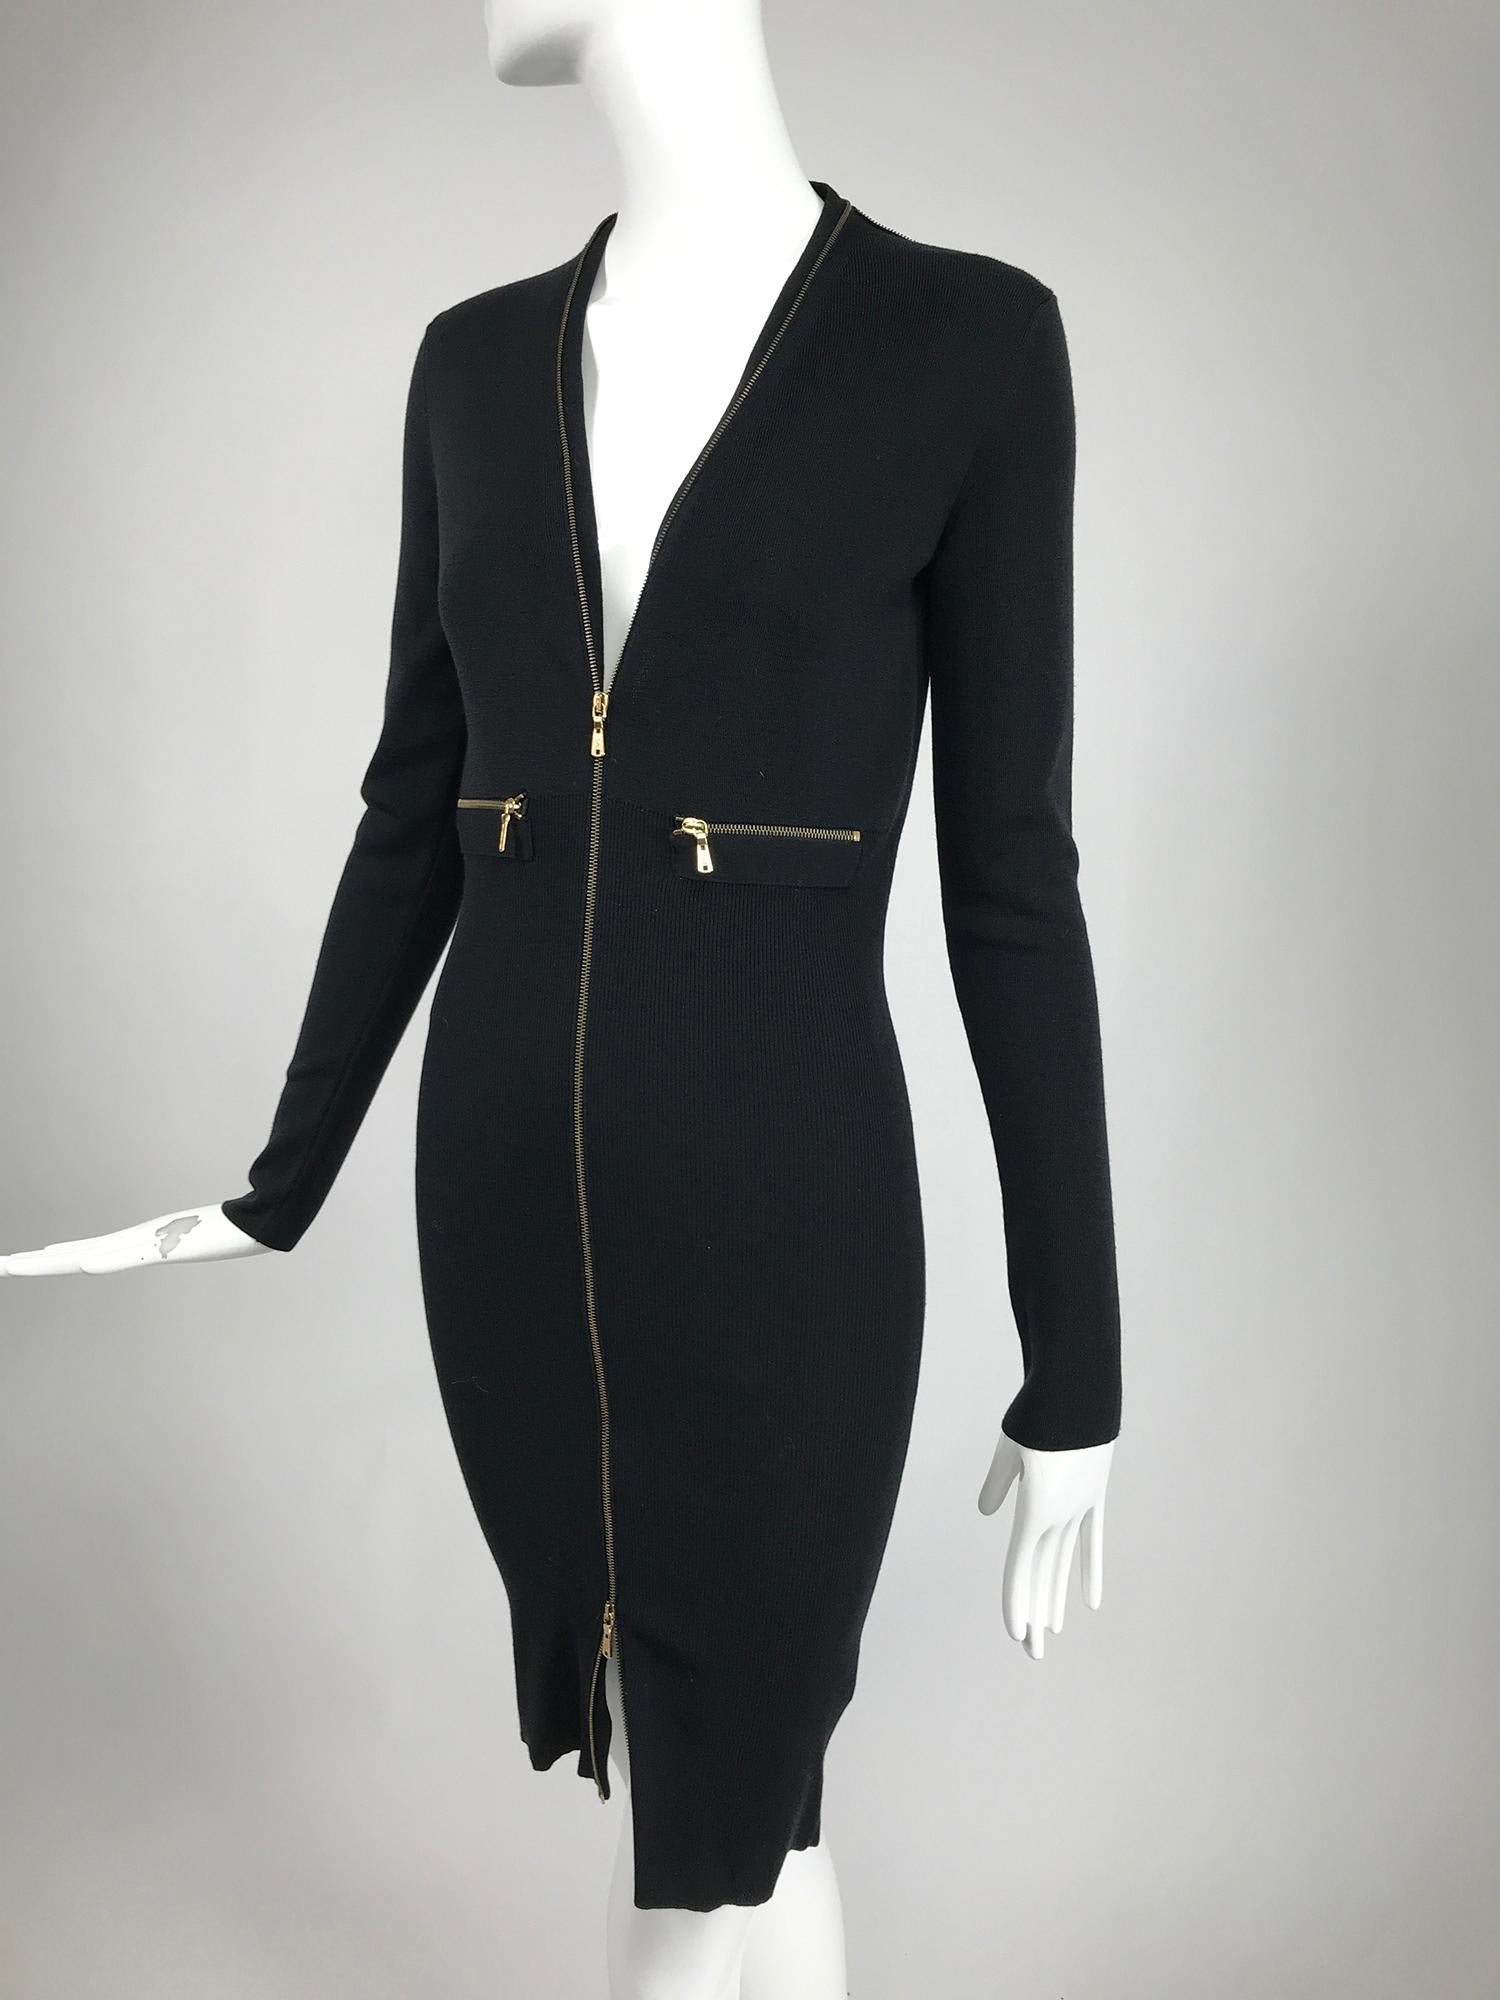 Yves Saint Laurent autumn/winter 2008 designed by Stefano Pilati, ribbed wool zipper front, body con dress. Soft black wood dress in a fine rib knit. The dress hugs the body and closes at the front with a gold metal separating zipper, each part has